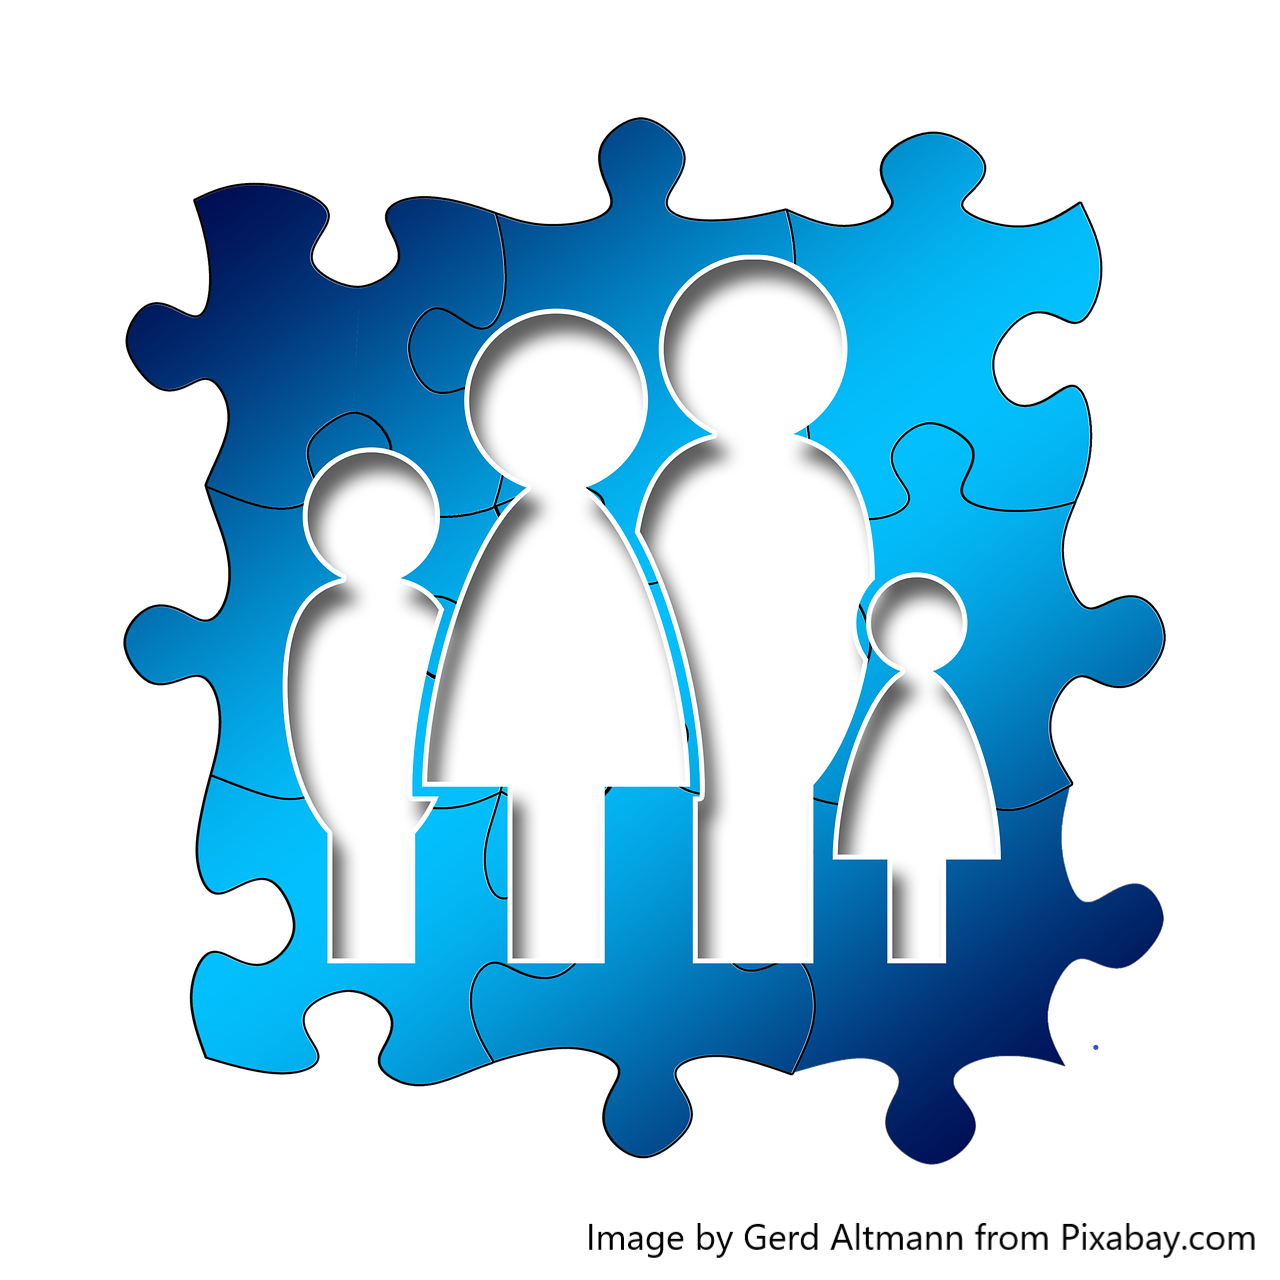 a blue puzzle piece showing an outline of a family - mum, dad, daughter, son | source: pixabay.com